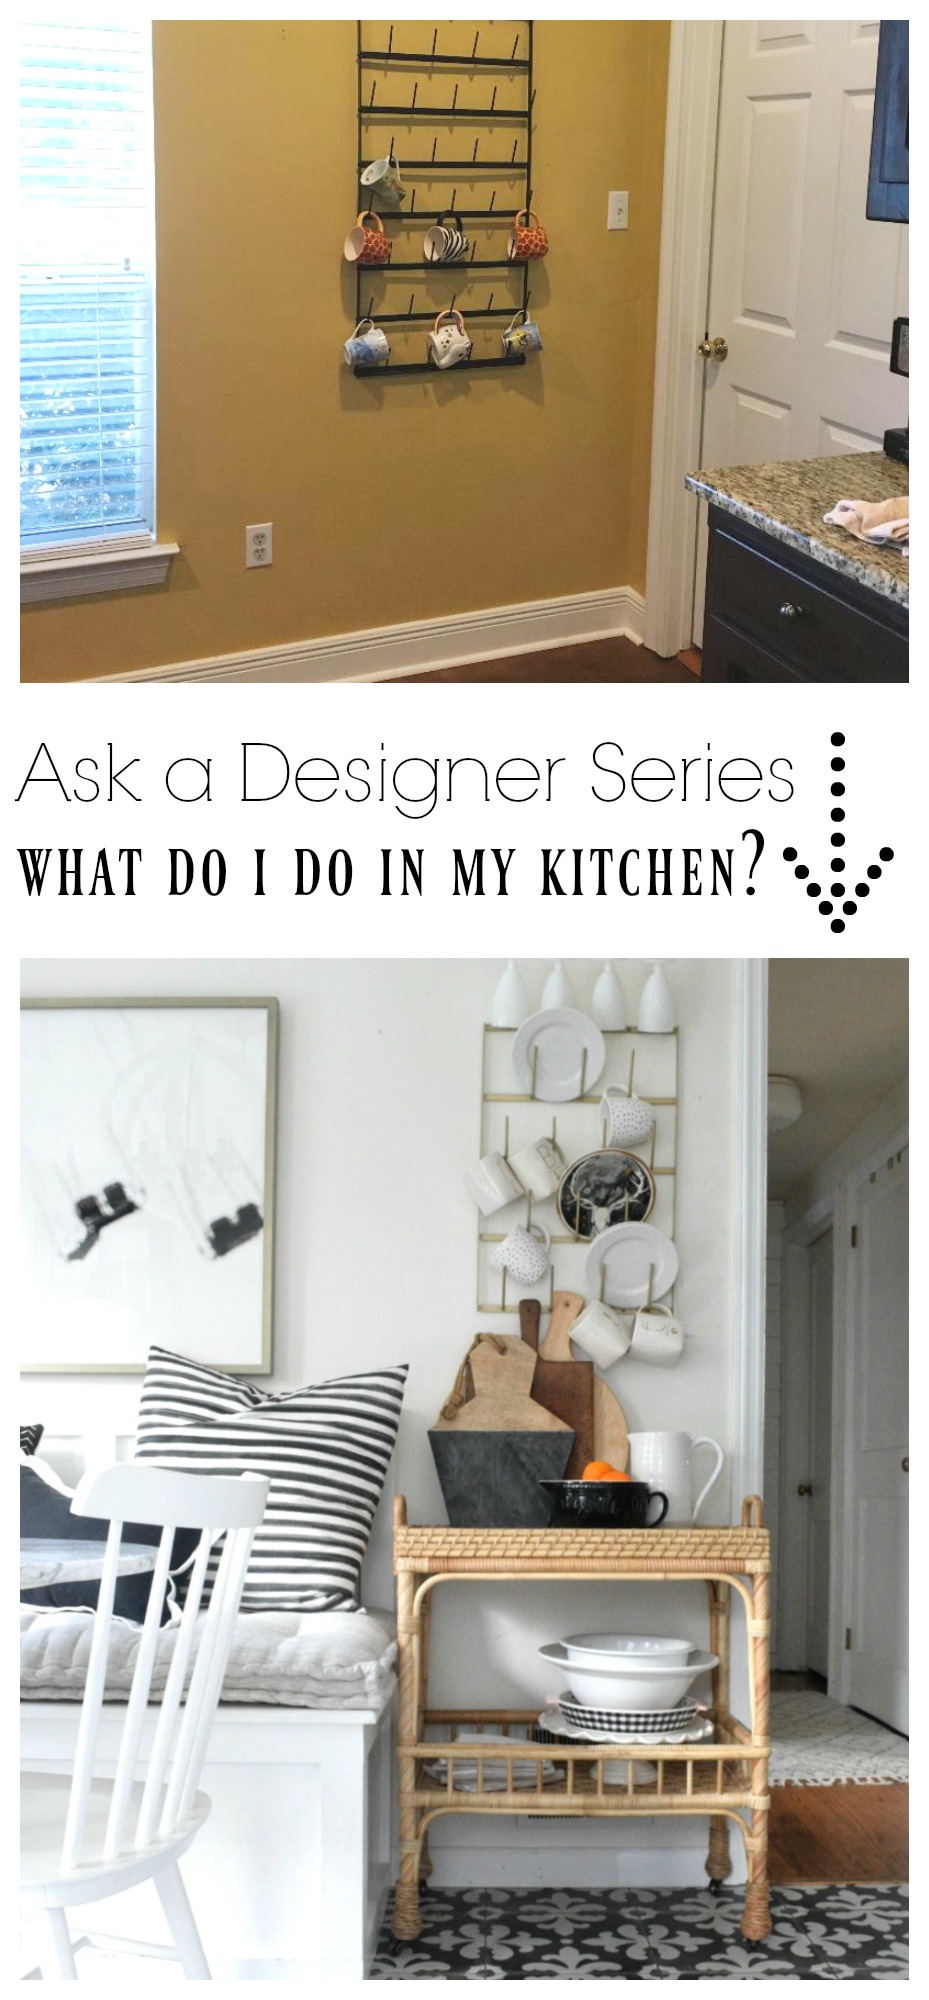 Ask a Designer Series- What do I do in my Kitchen?